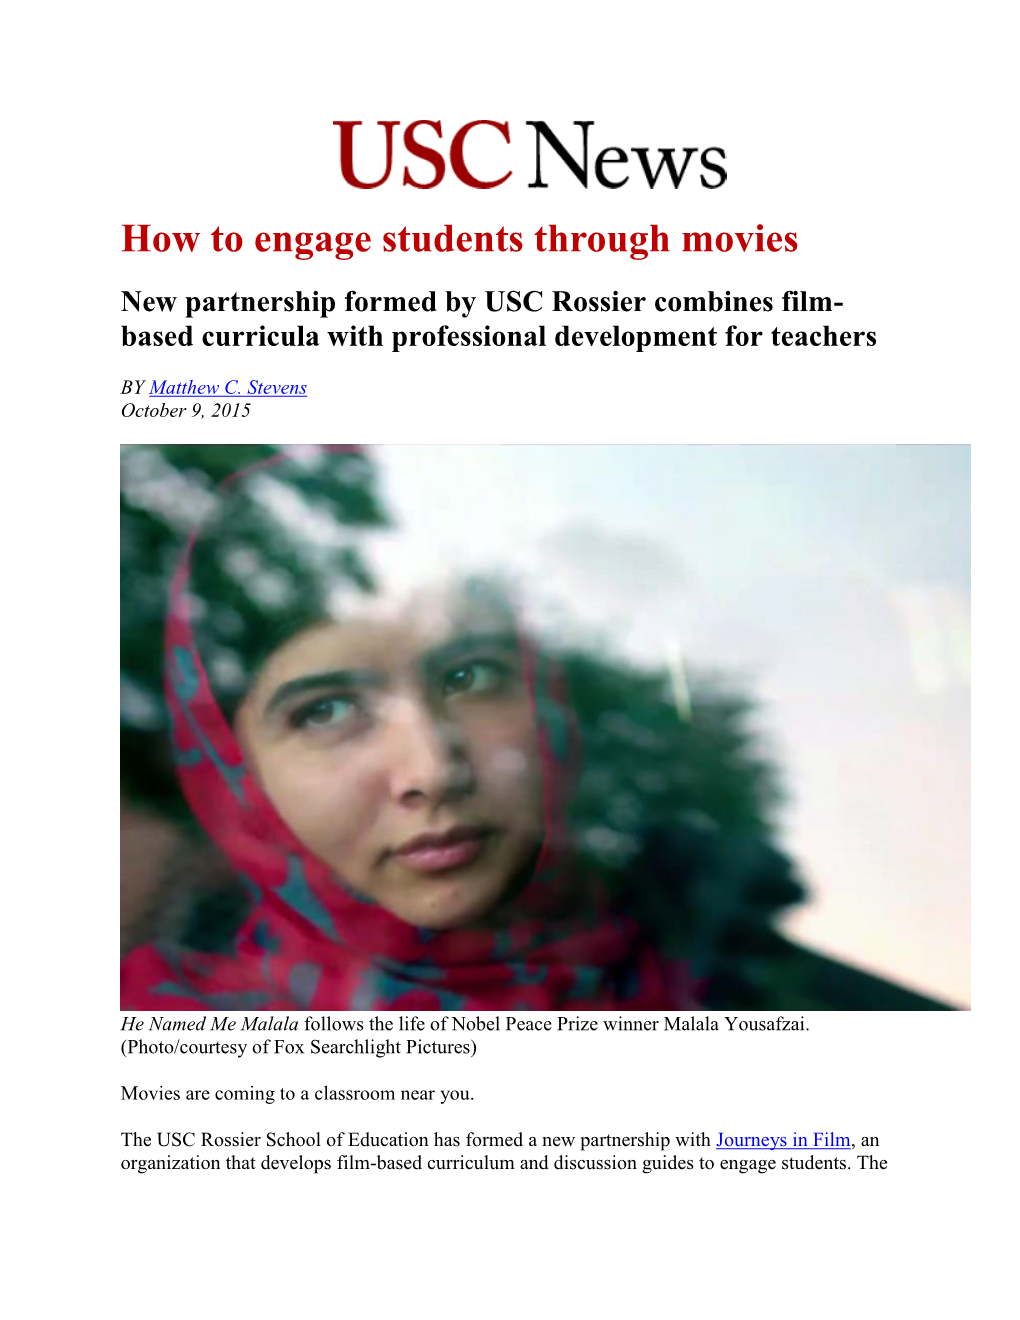 How to Engage Students Through Movies New Partnership Formed by USC Rossier Combines Film- Based Curricula with Professional Development for Teachers